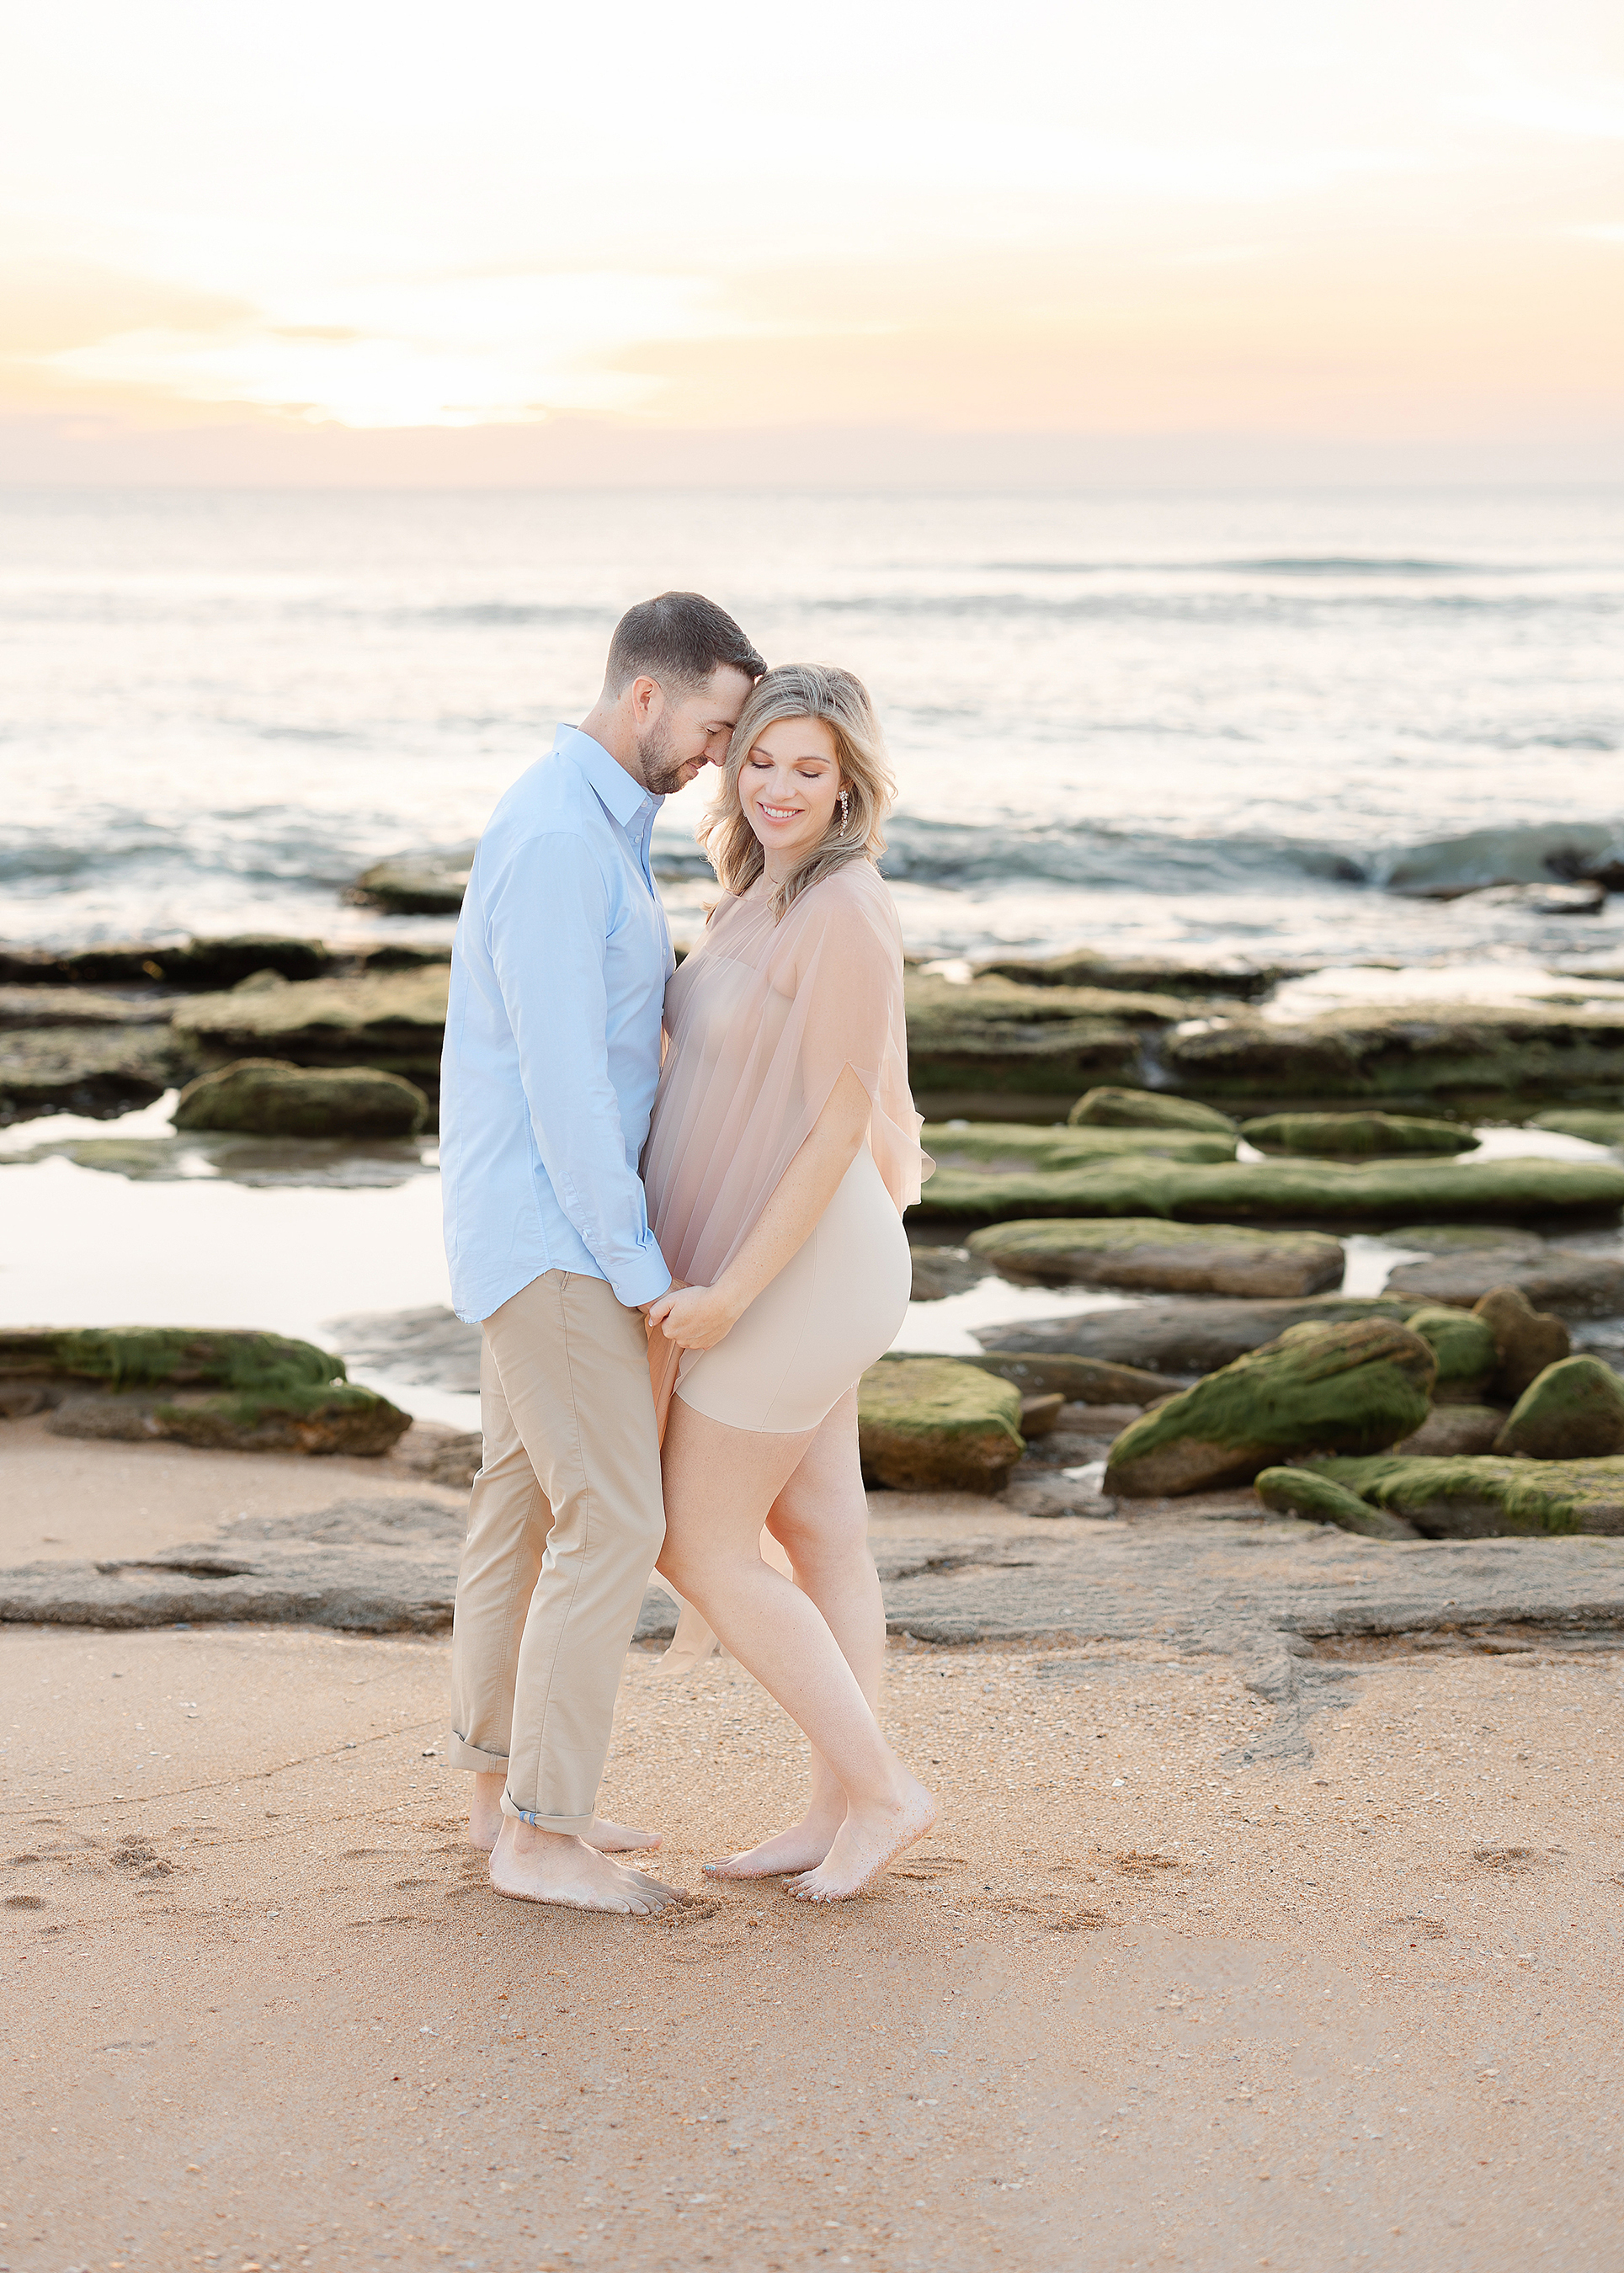 A coastal maternity portrait at sunrise in St. Augustine.